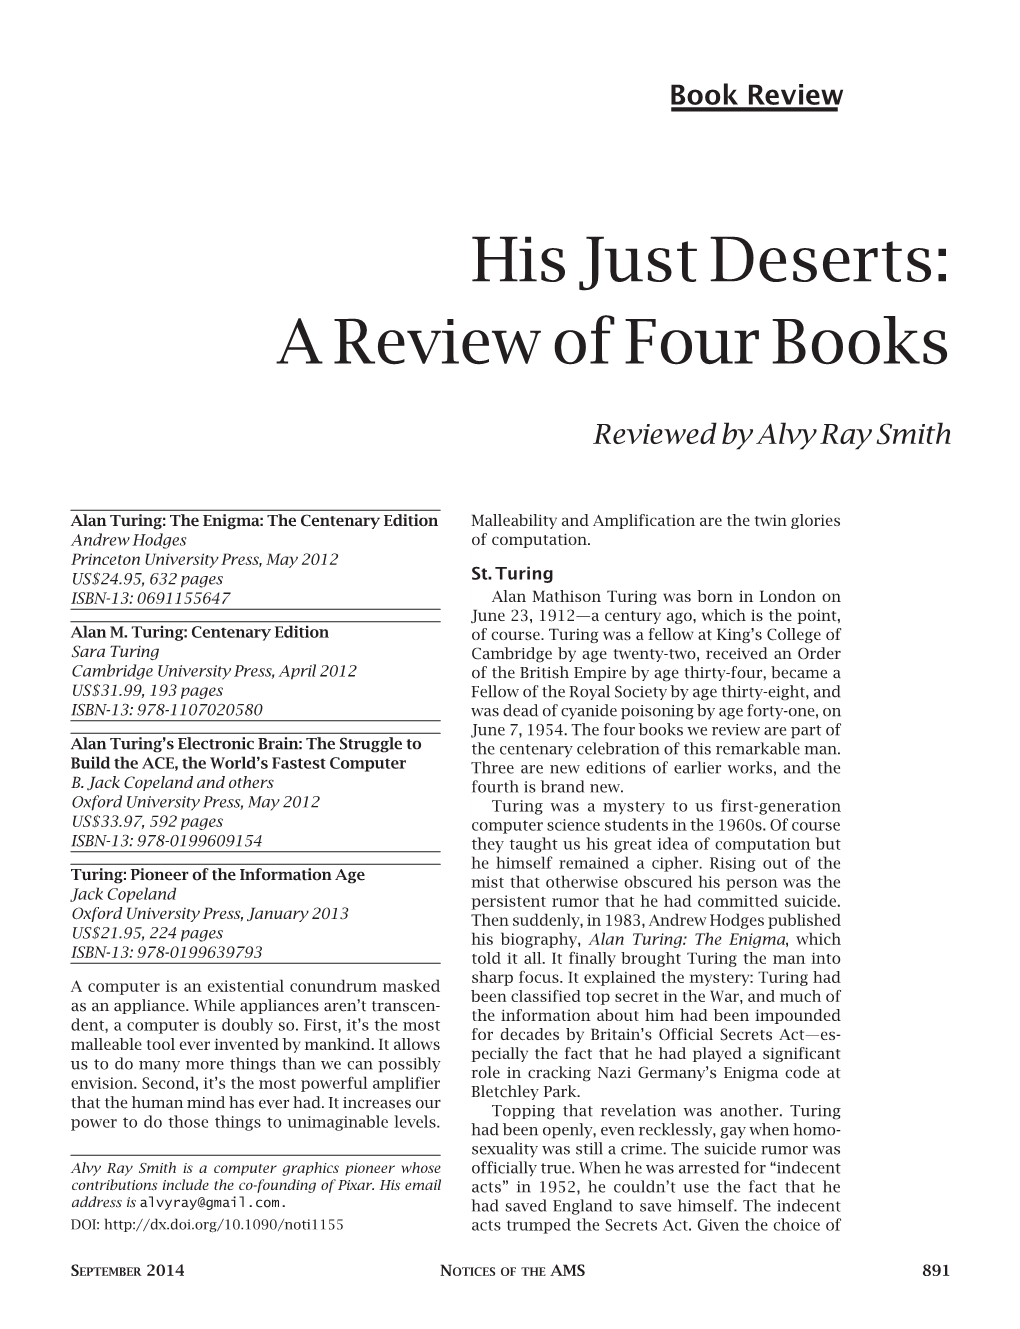 A Review of Four Books